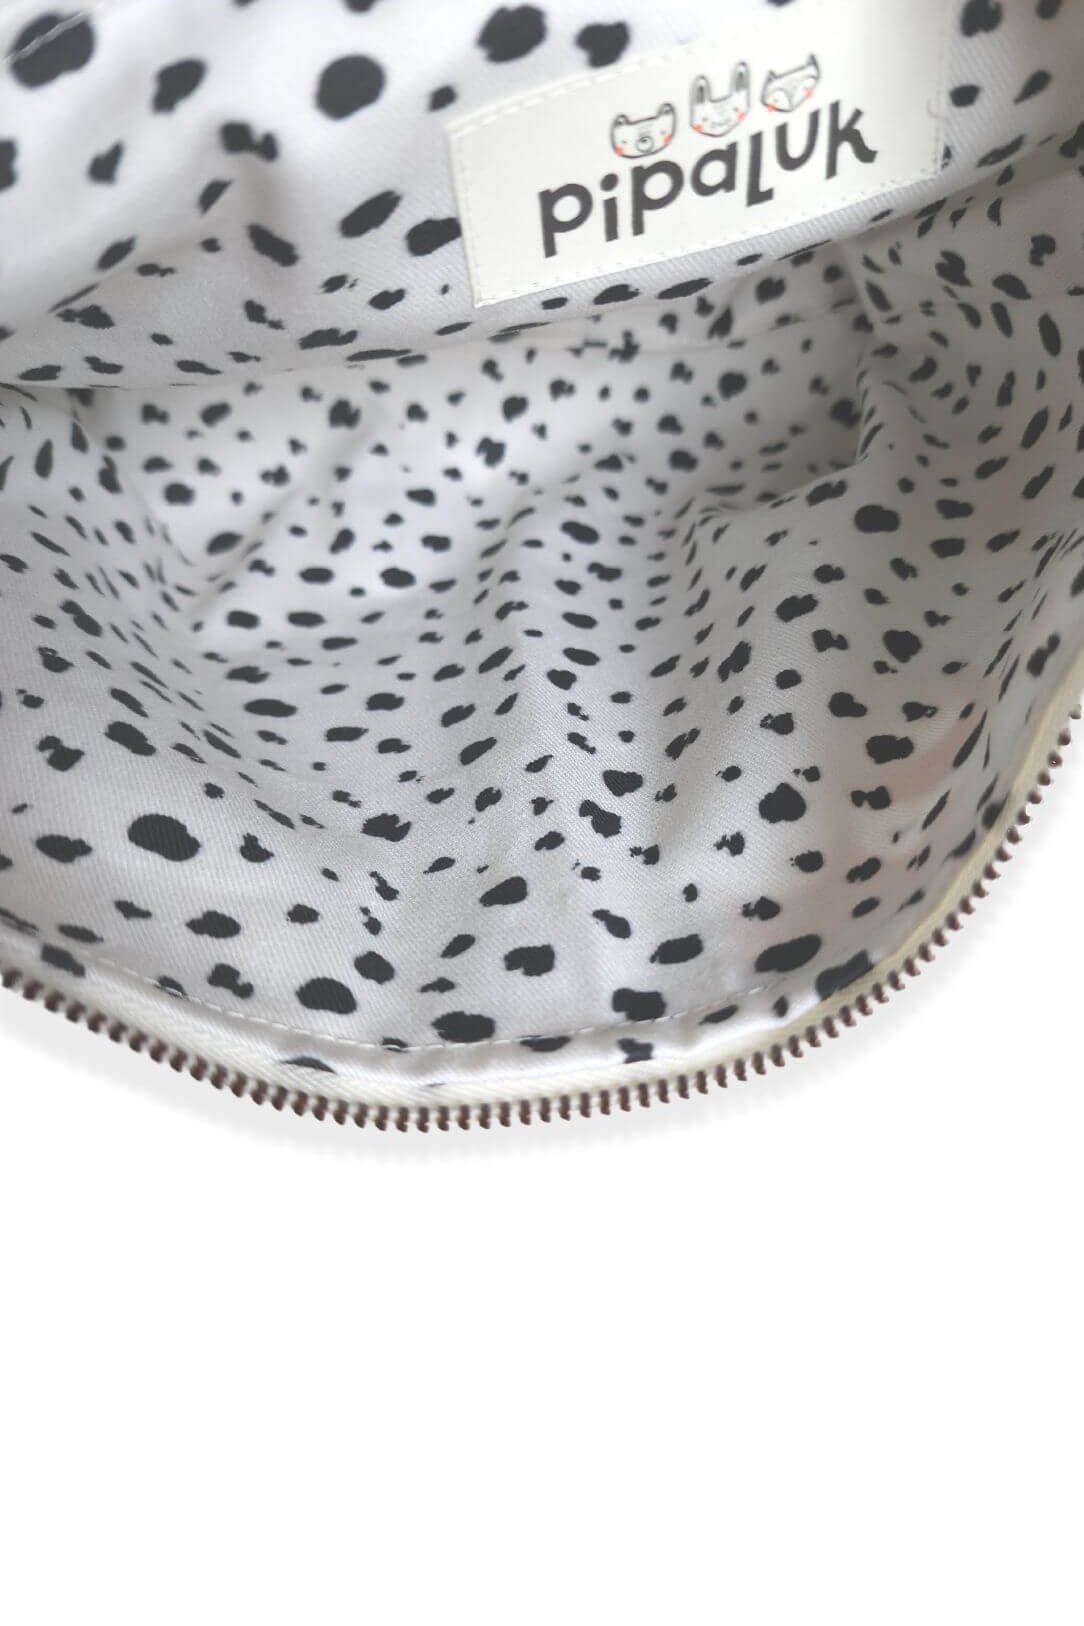 inside of zippered pouch with black and white speckled fabric